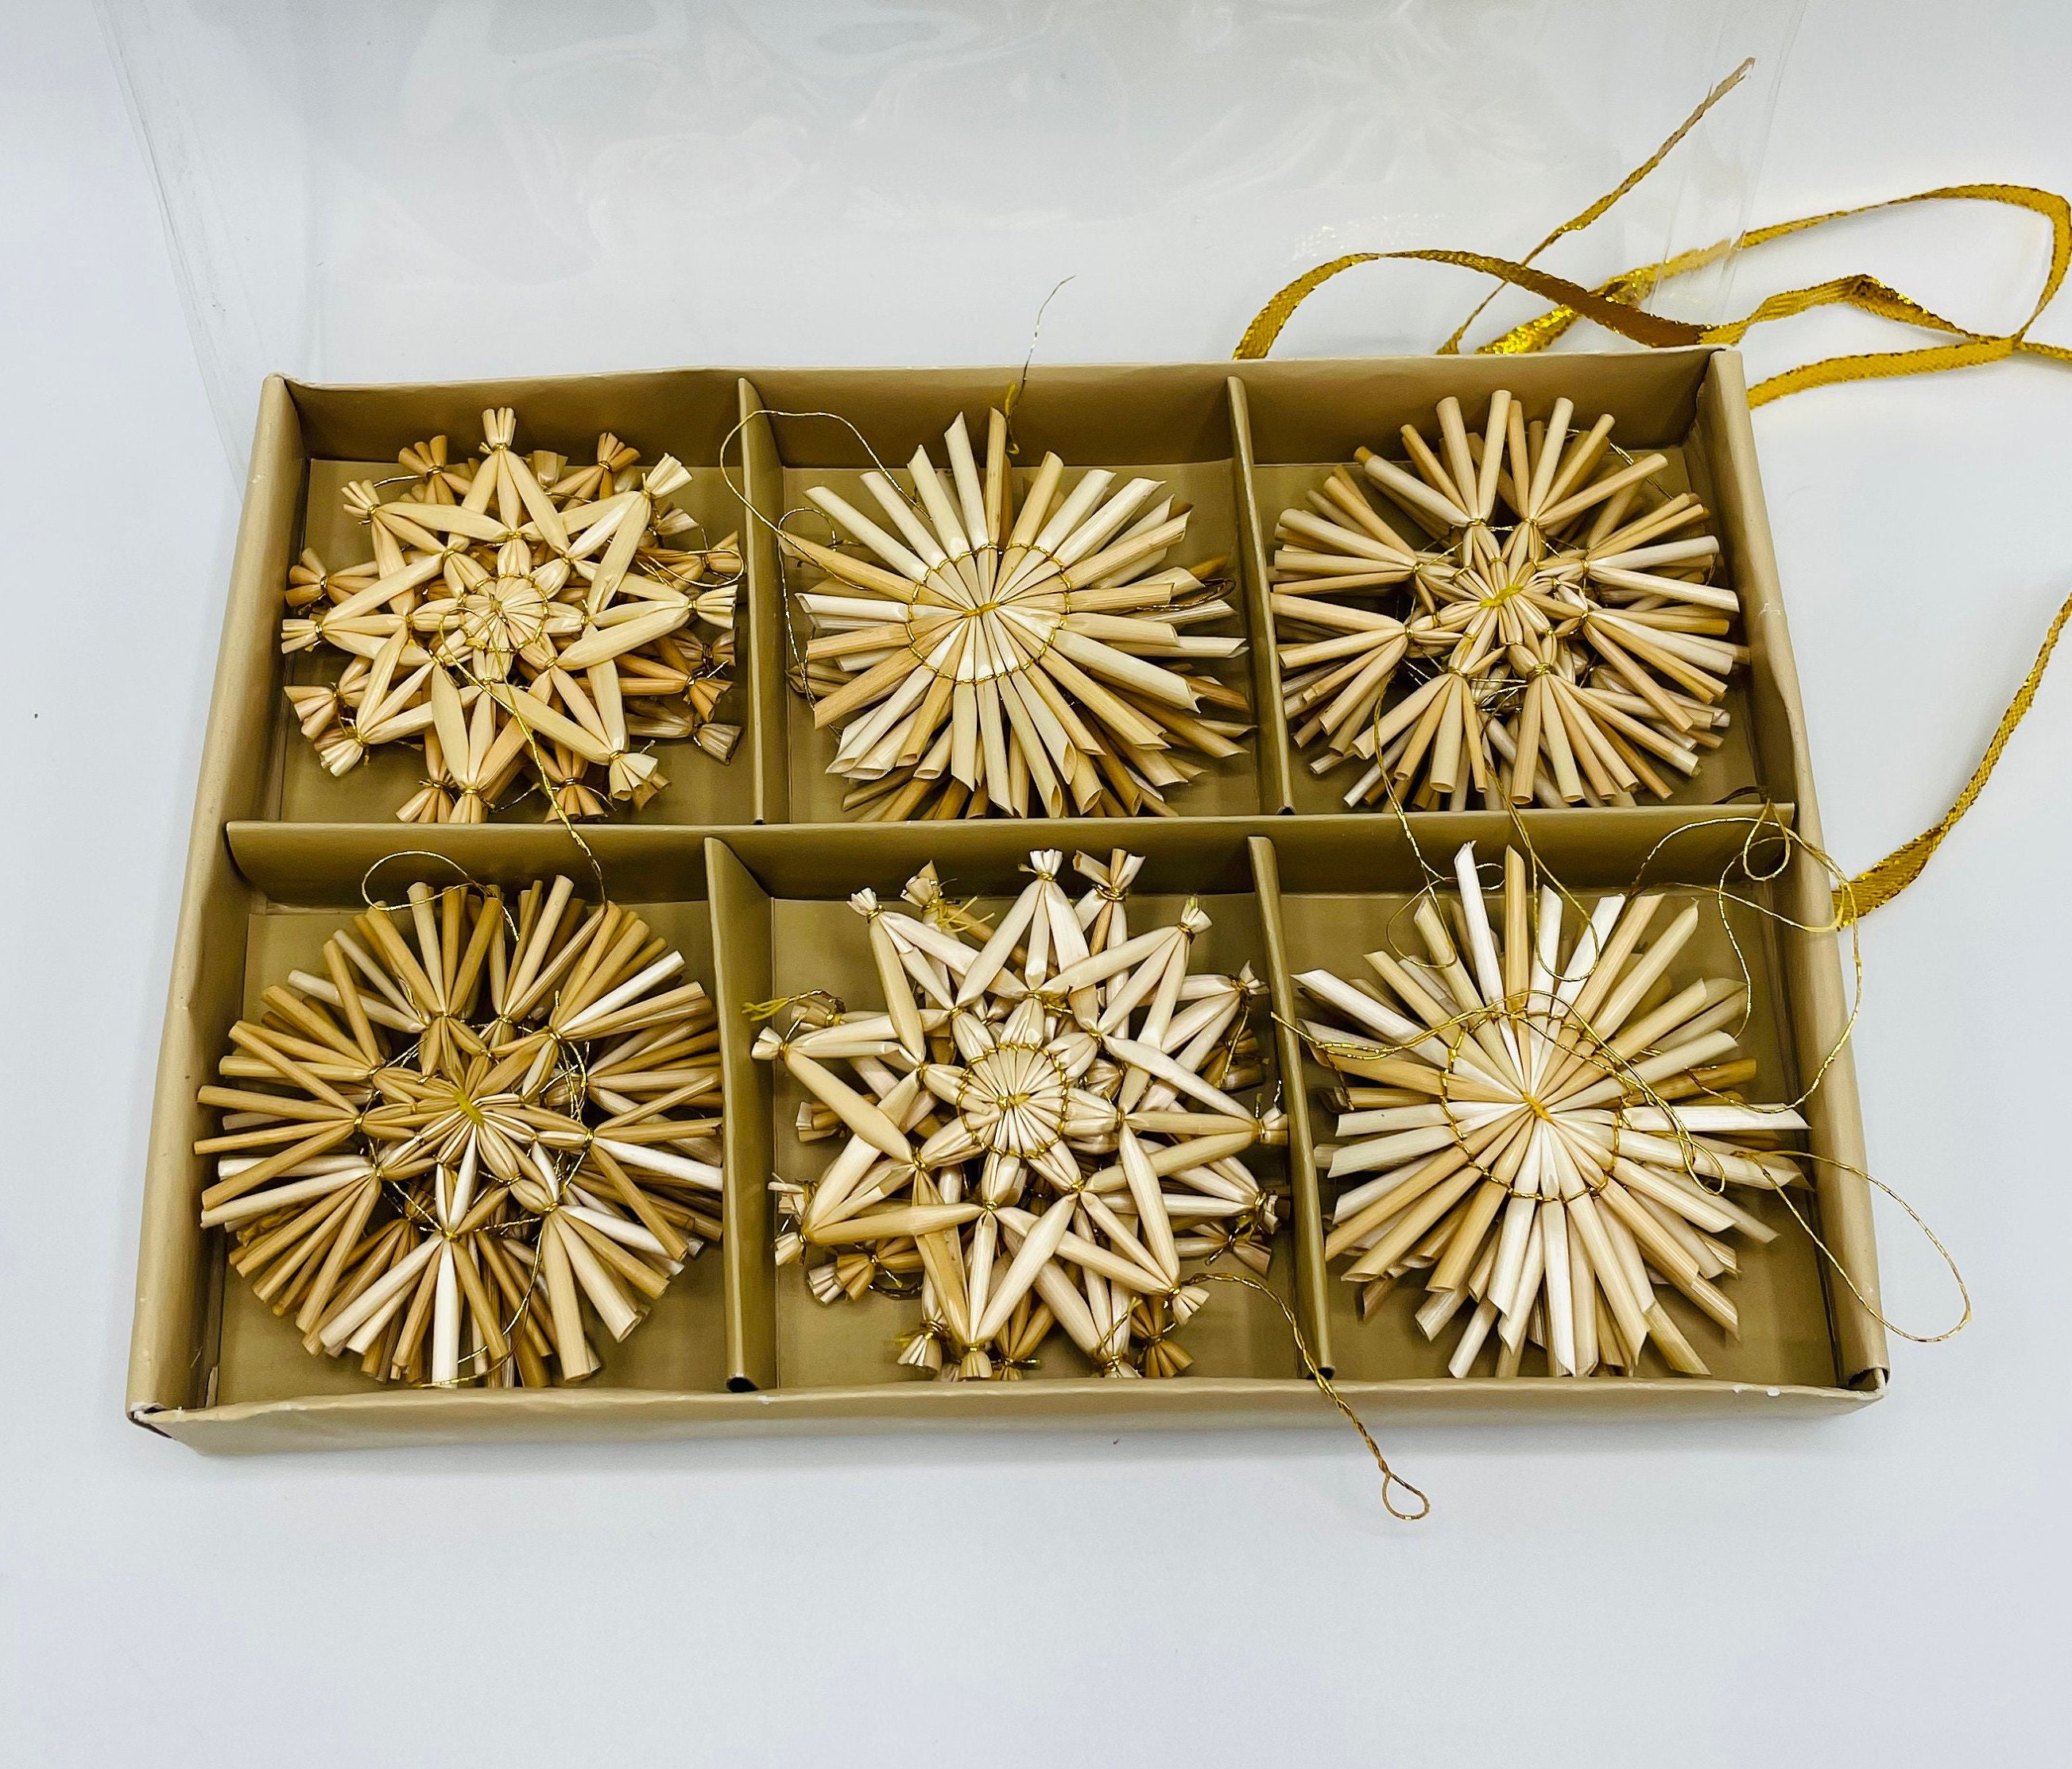 Straw snowflakes for hanging